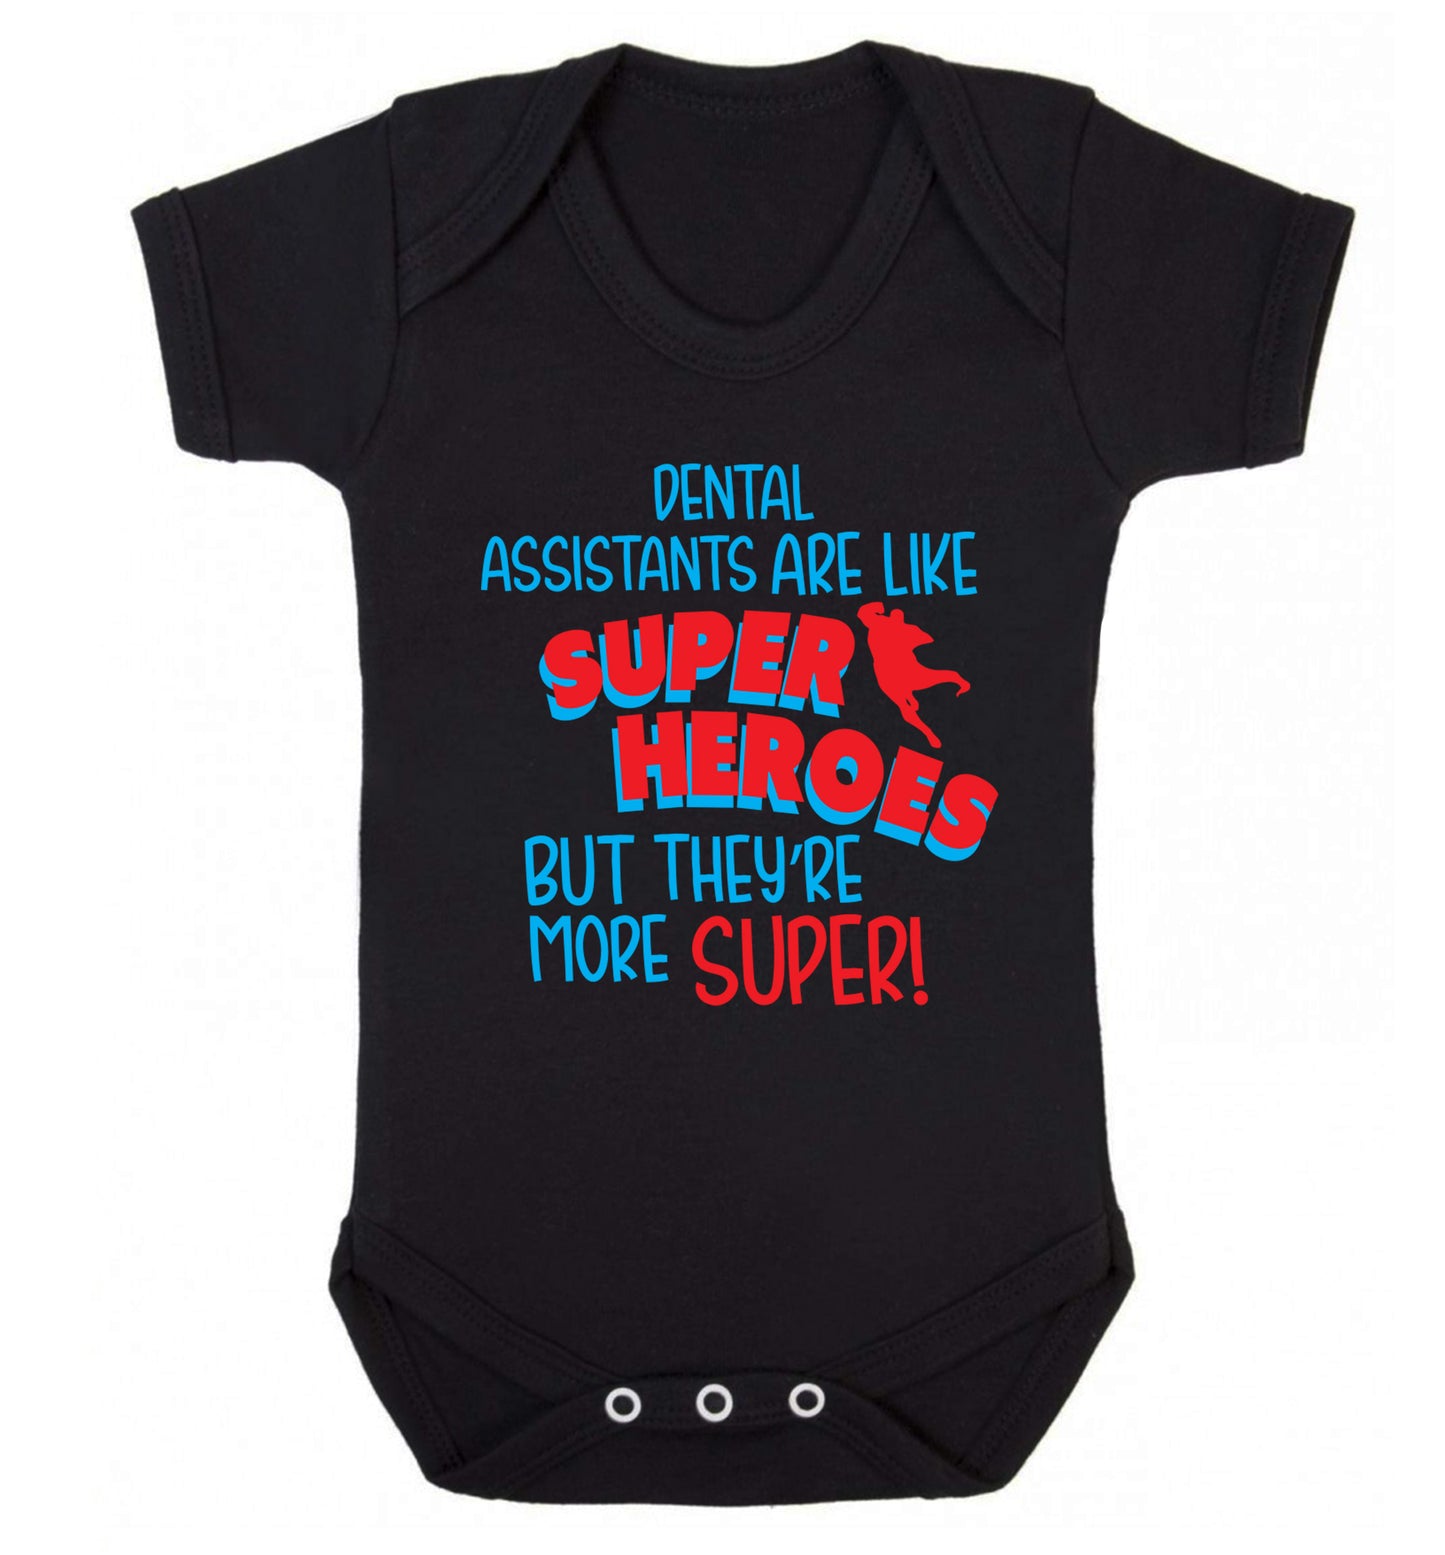 Dental Assistants are like superheros but they're more super Baby Vest black 18-24 months